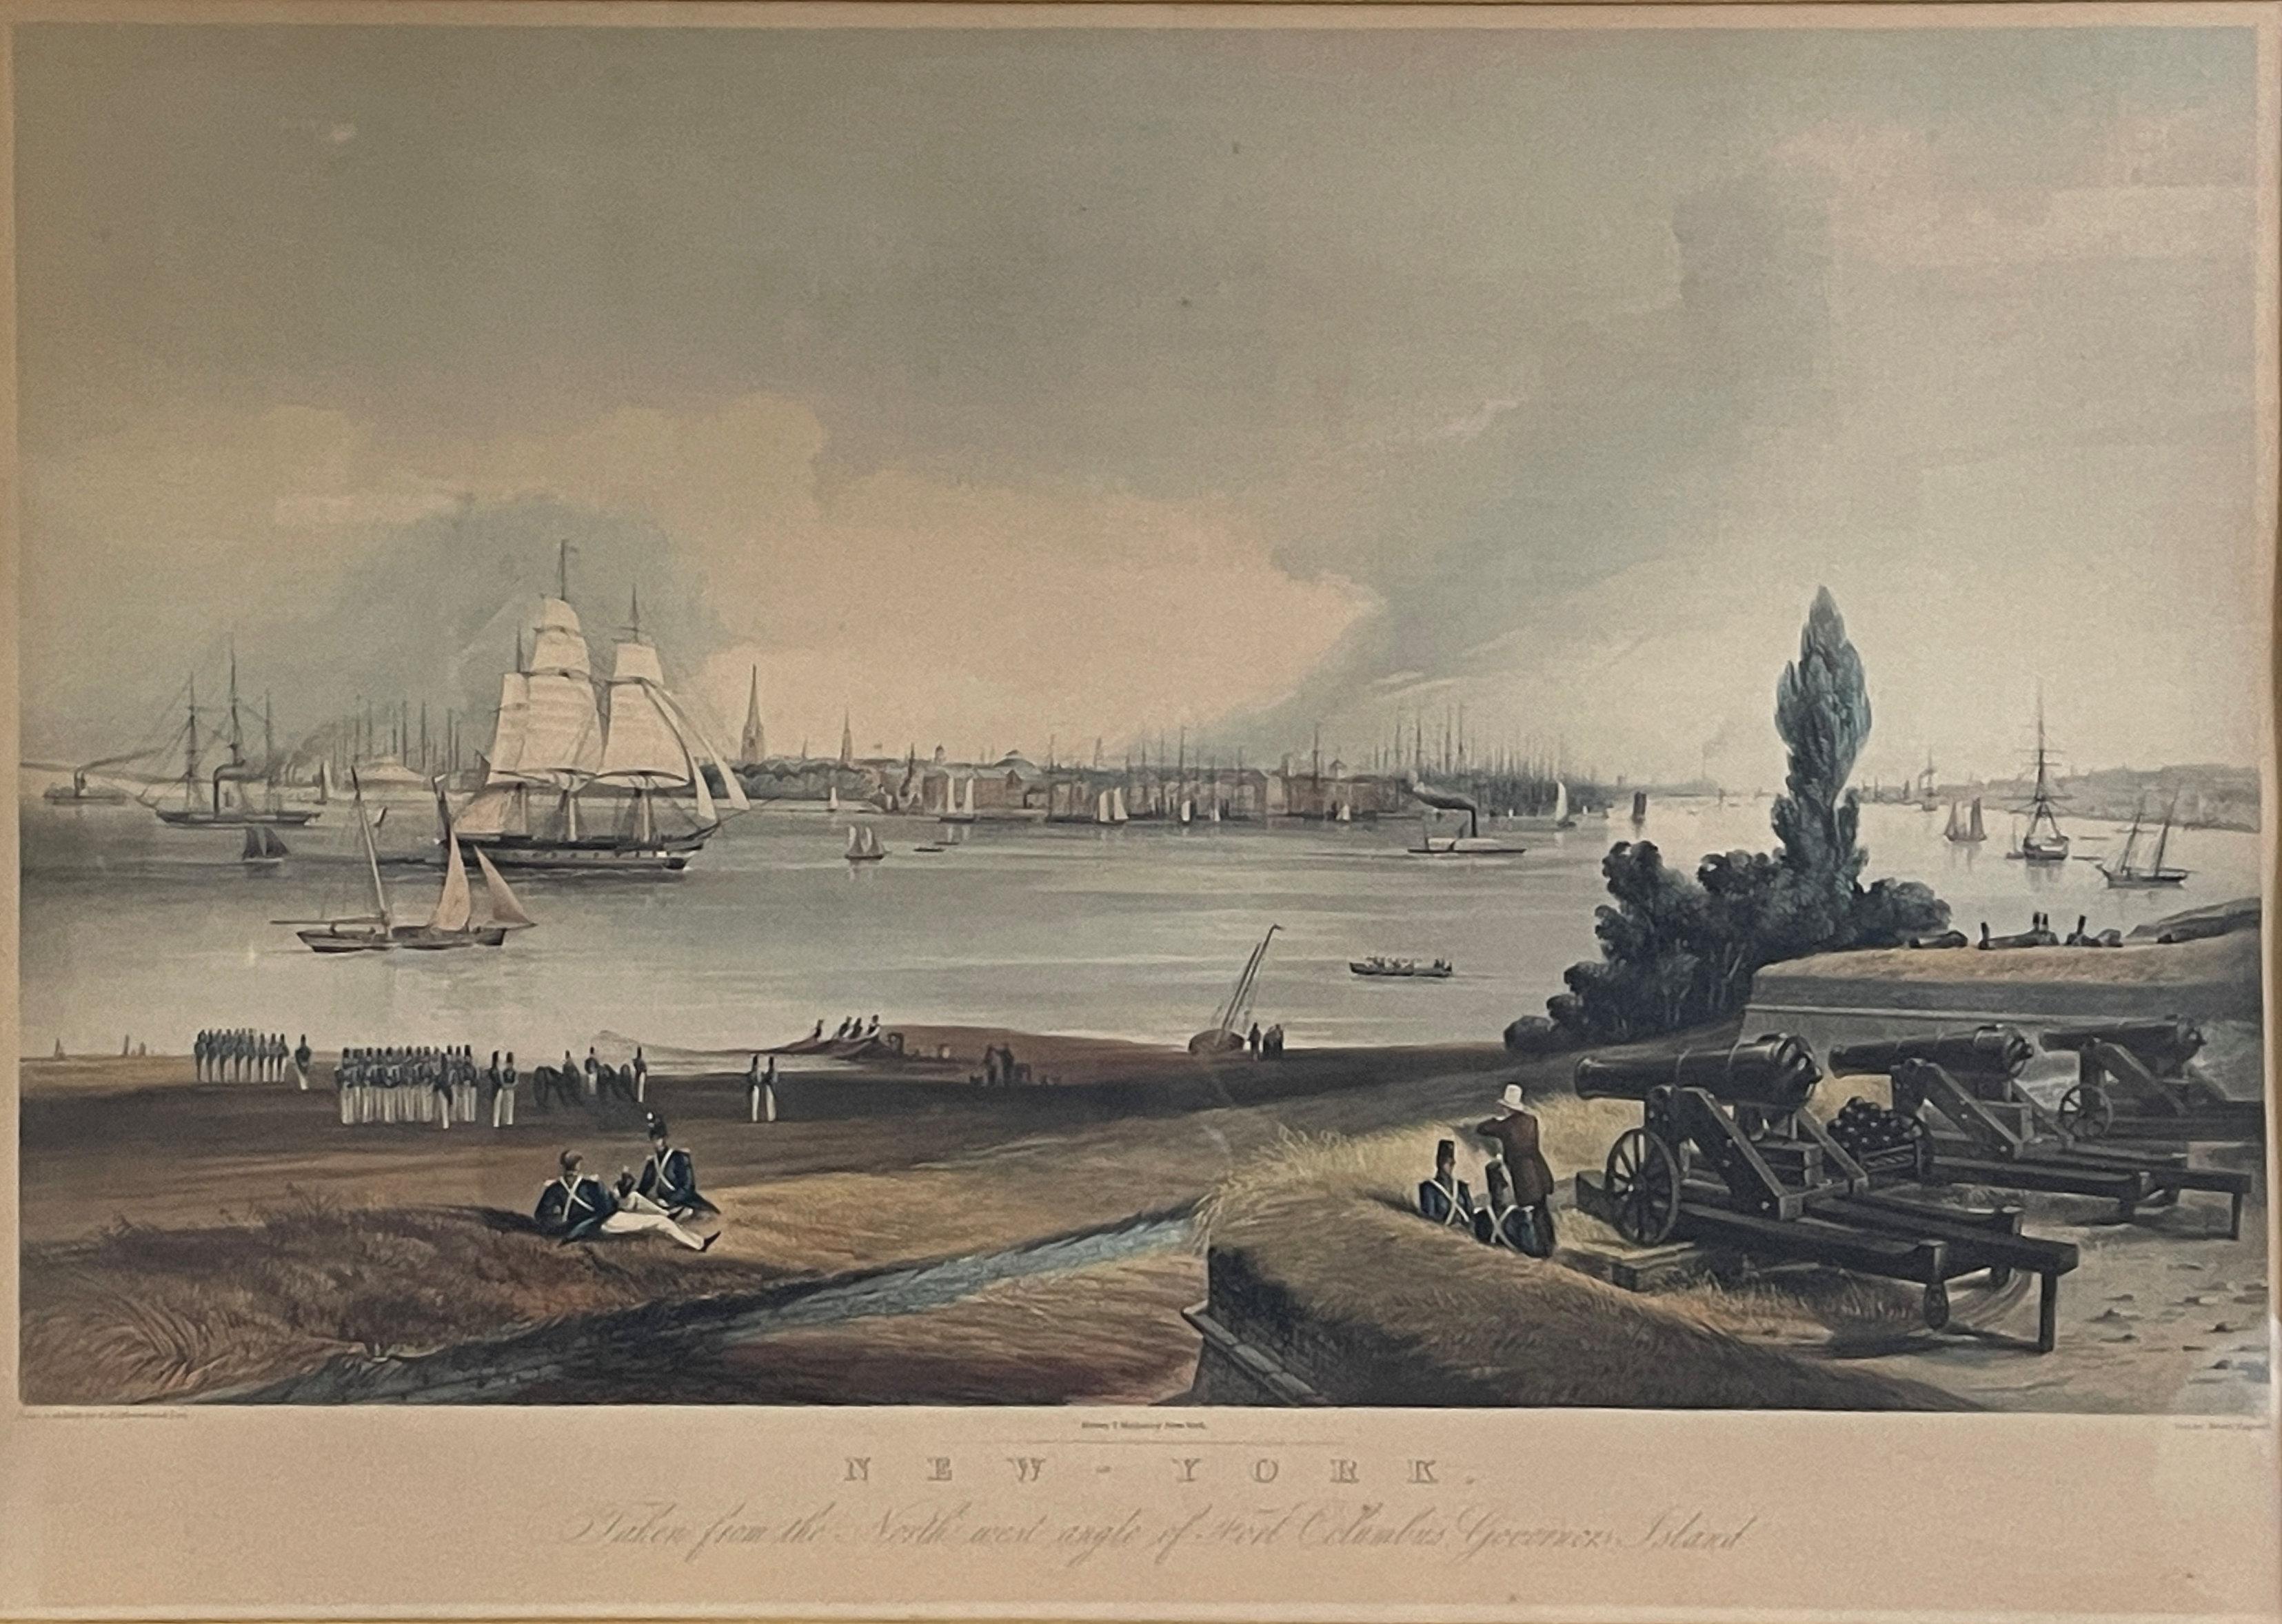 Henry Papprill Landscape Print - "New York - Taken from the Northwest angle of Fort Columbus, Governor's Island"